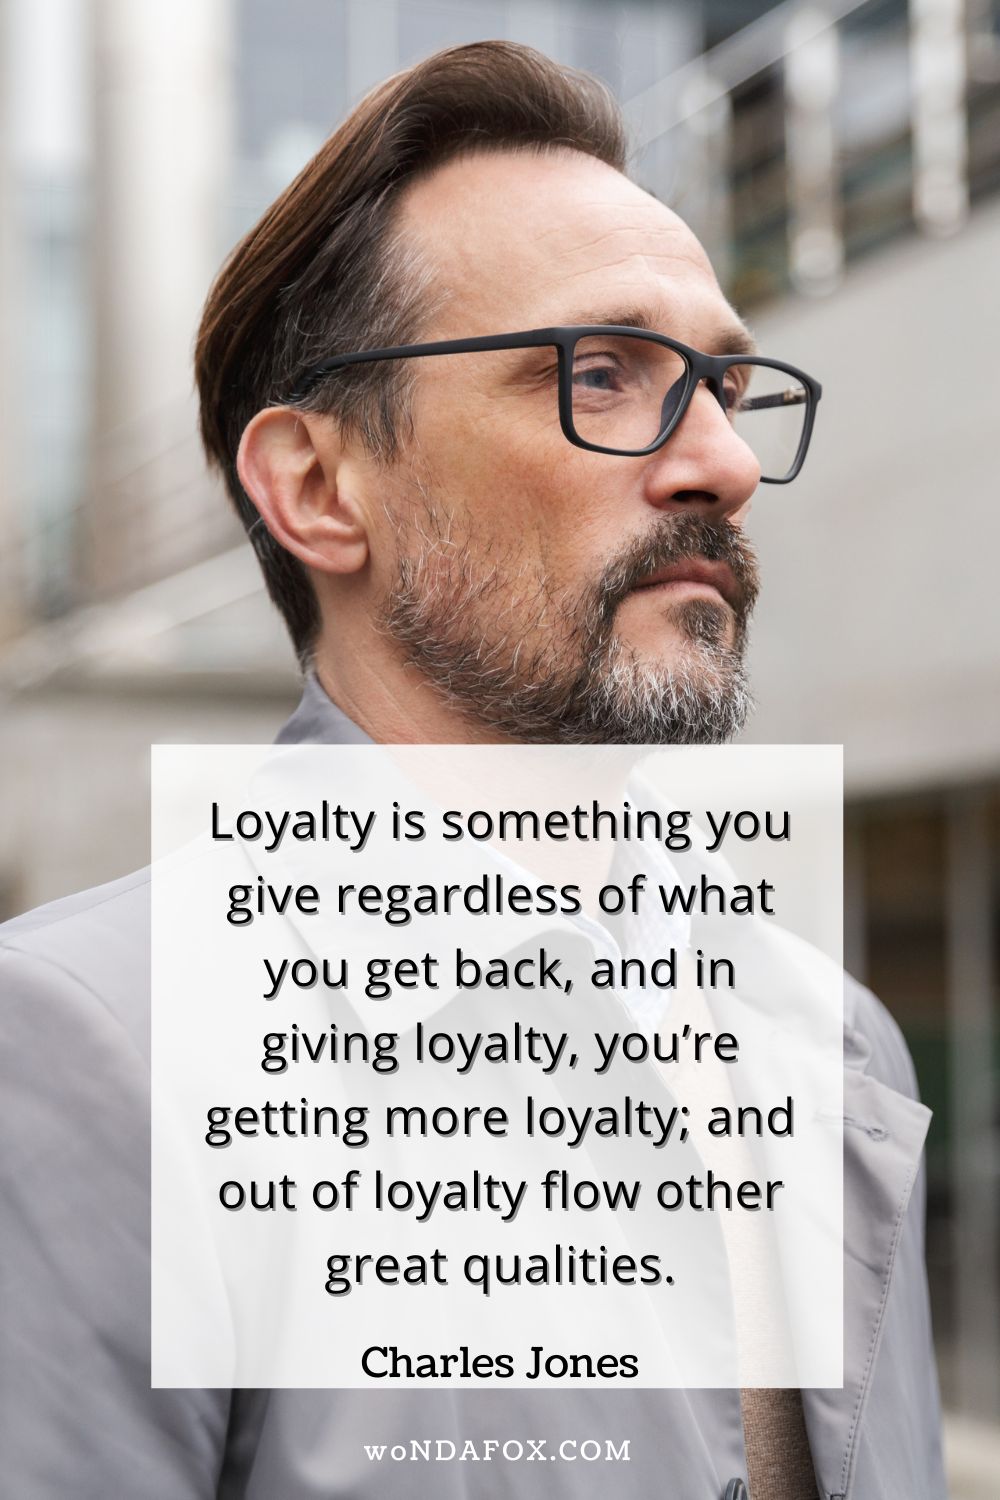 “Loyalty is something you give regardless of what you get back, and in giving loyalty, you’re getting more loyalty; and out of loyalty flow other great qualities.